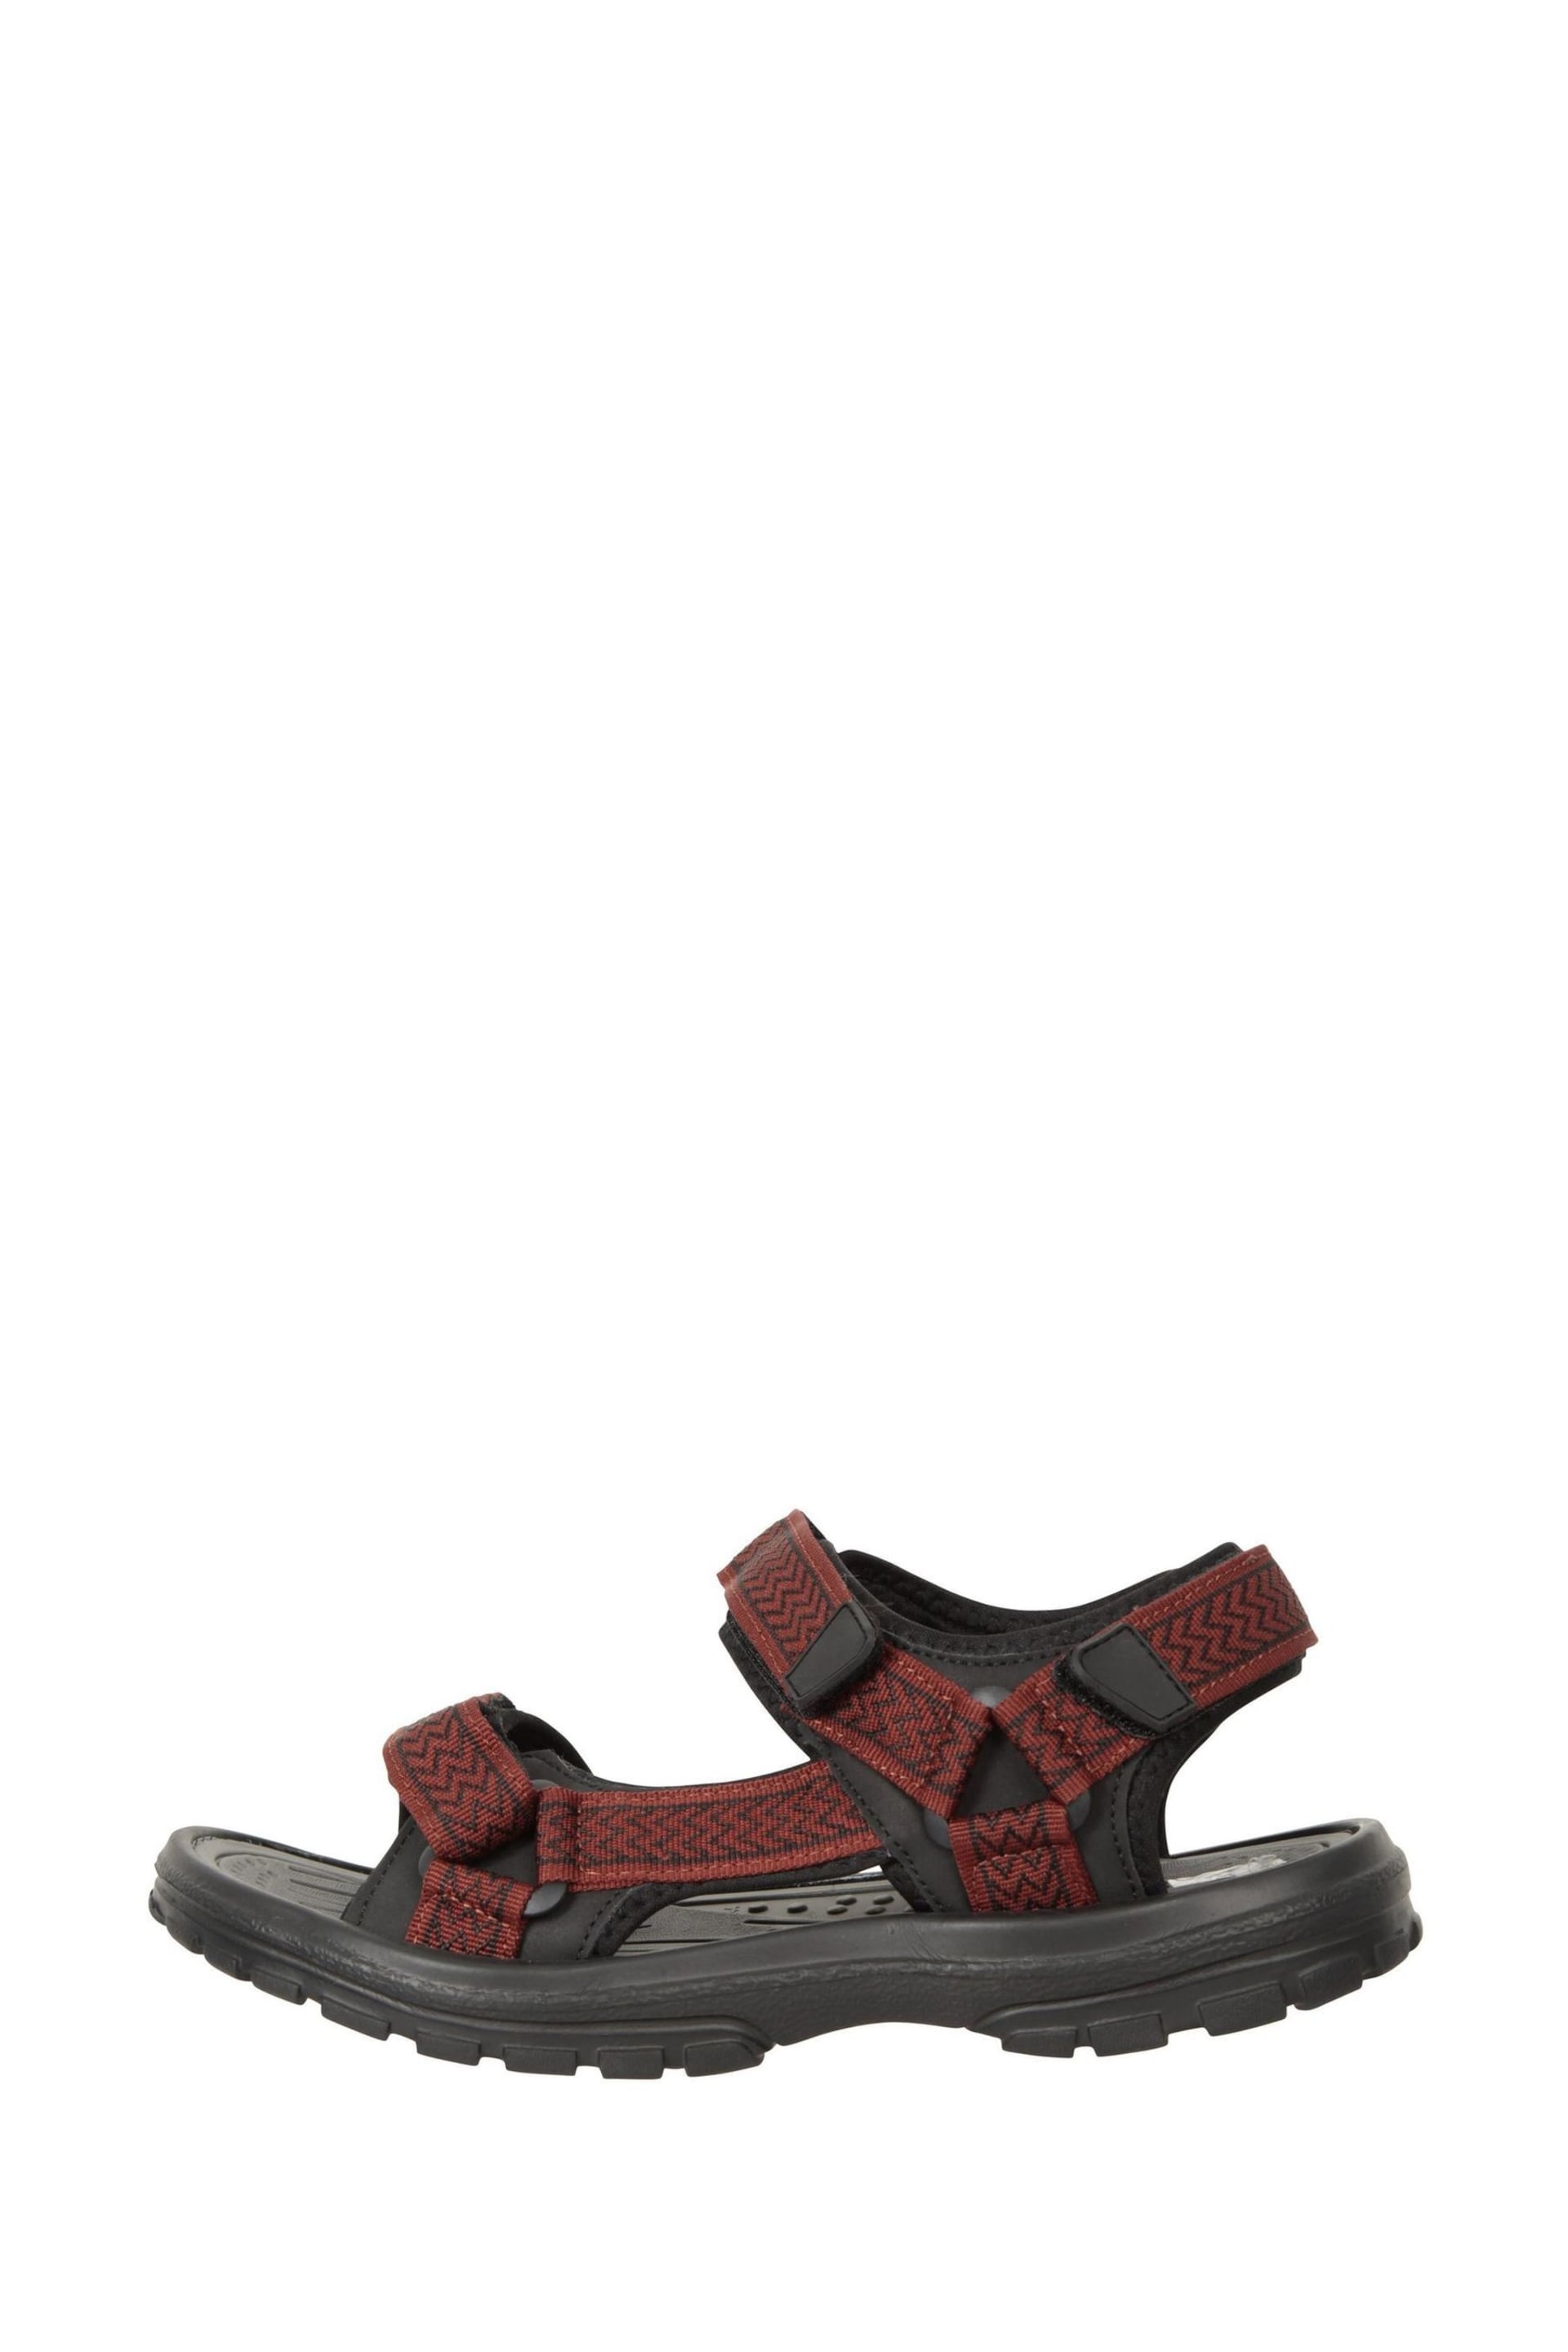 Mountain Warehouse Brown Crete Mens Sandals - Image 5 of 6